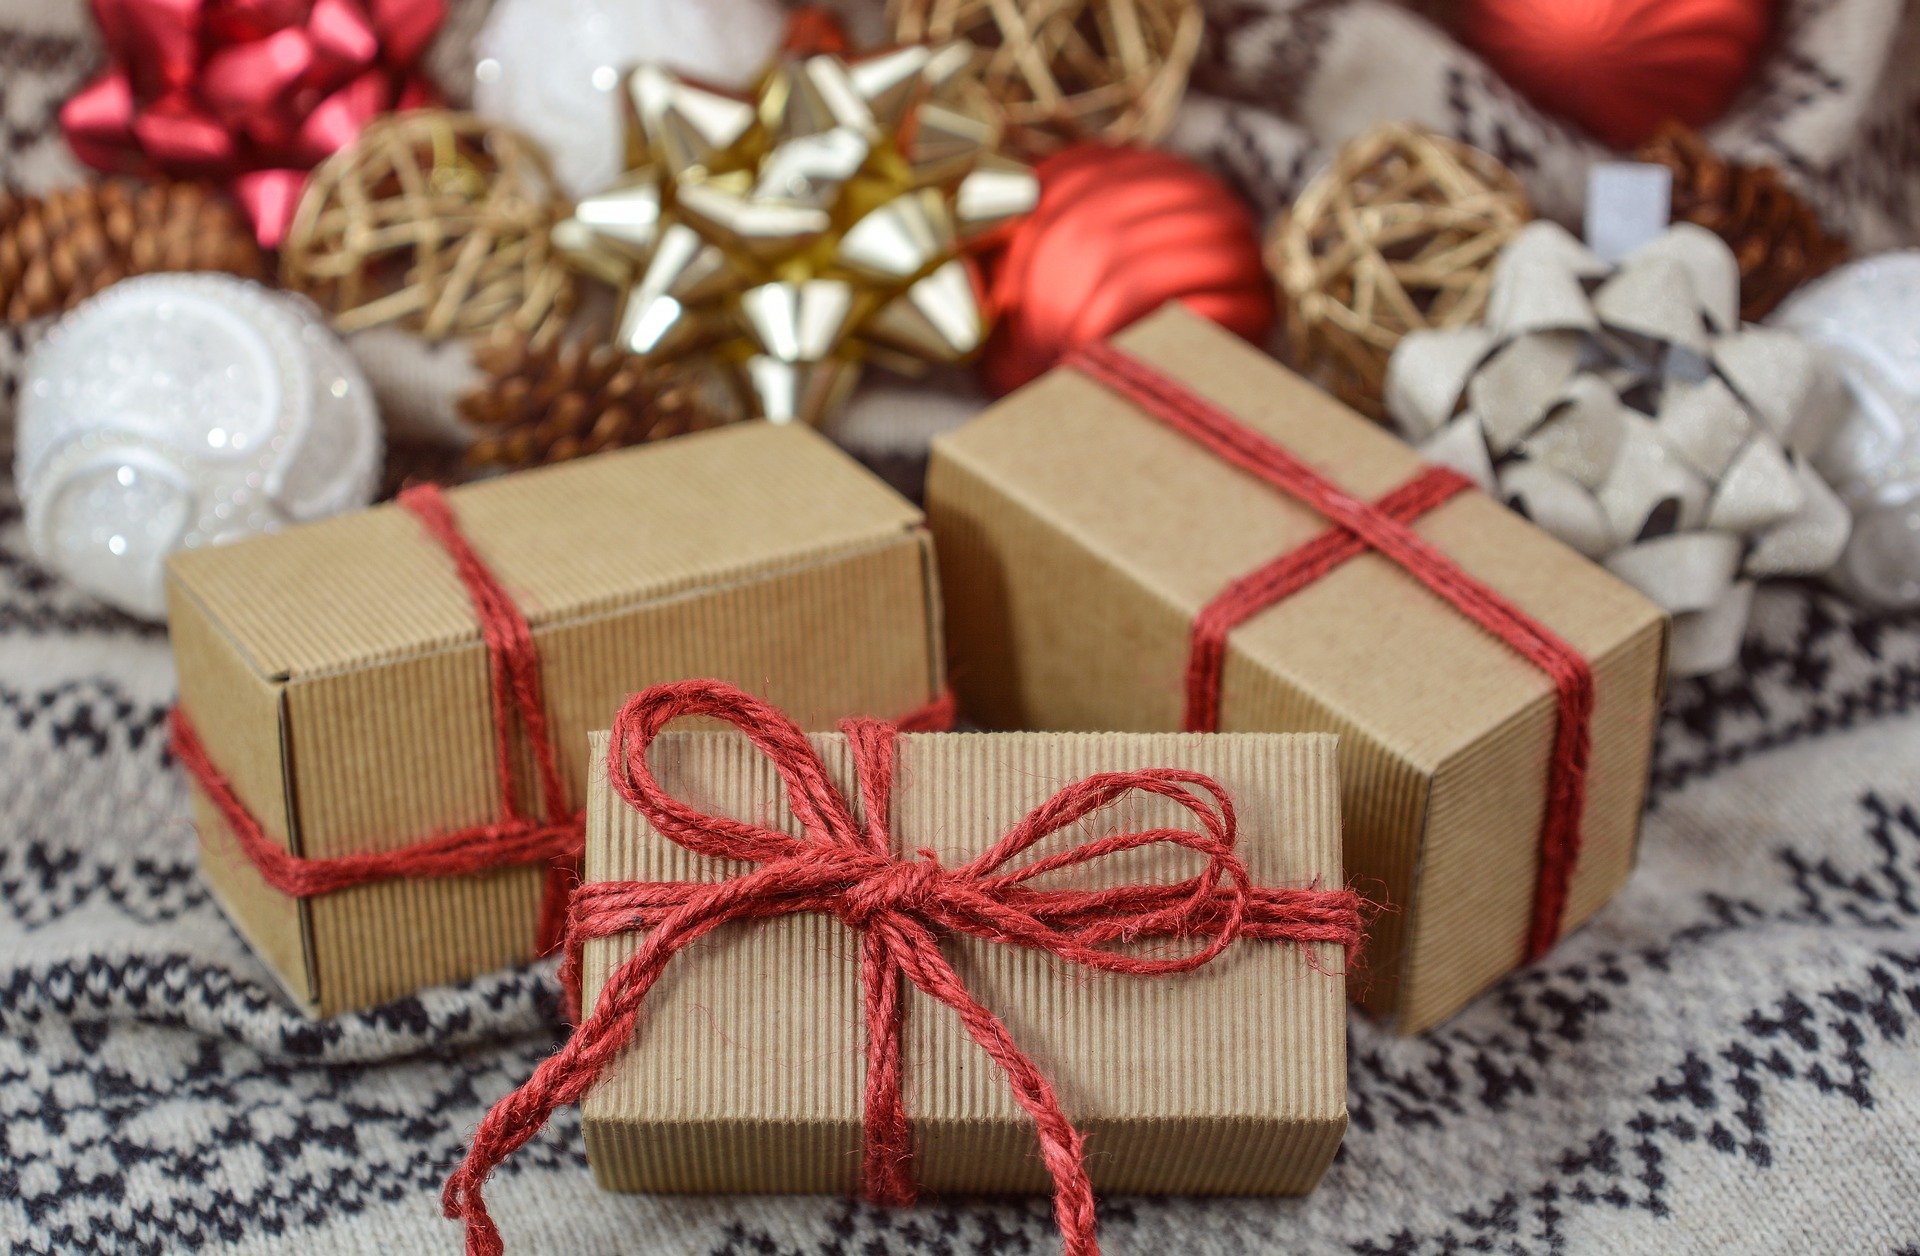 Best online Charity Shops for Christmas Gifts